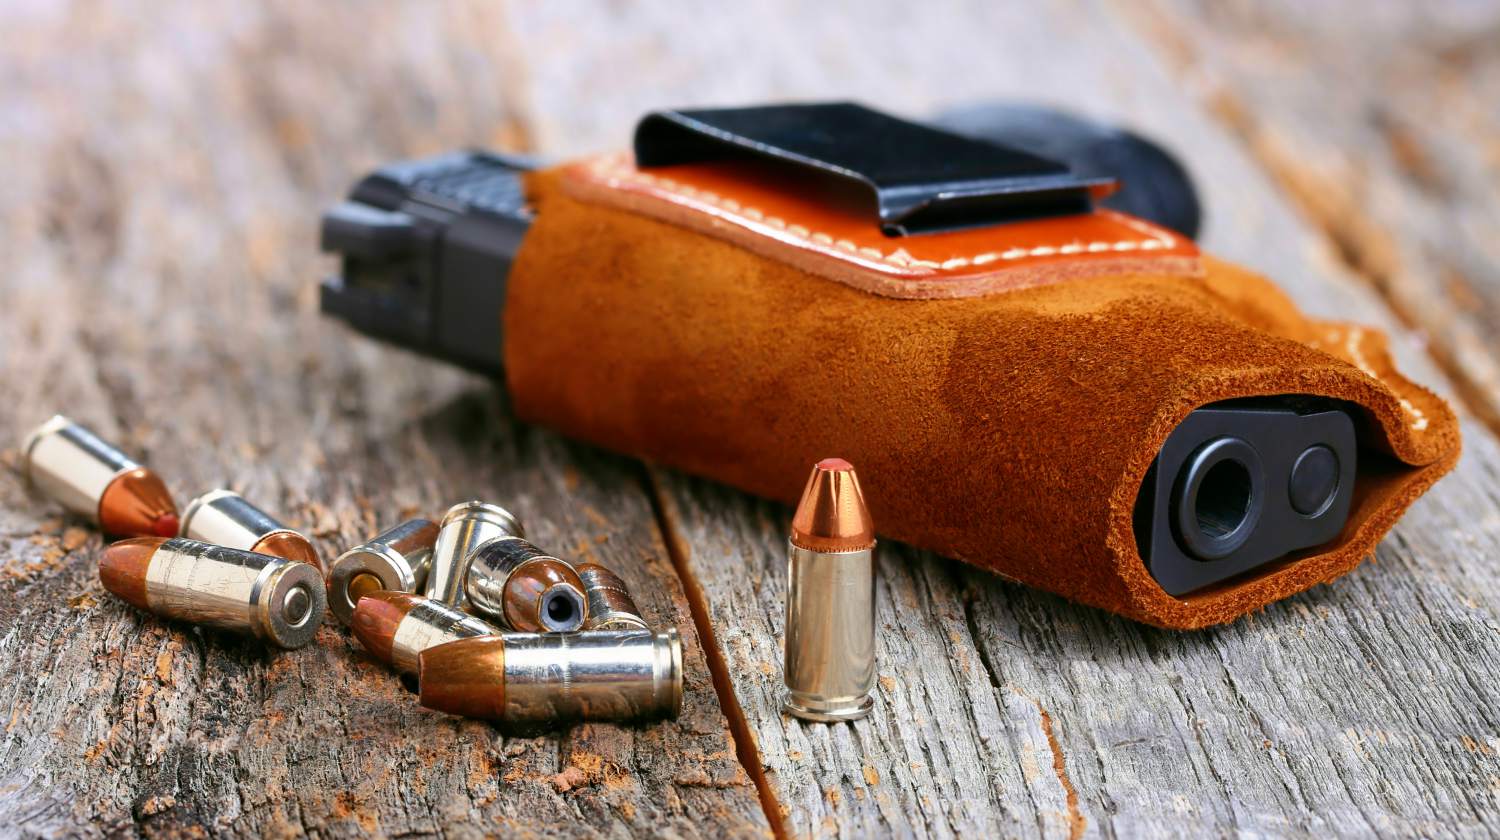 Featured | Automatic Handgun with leather holster and bullets on a wooden background | Gear Review: Urban Carry Holster, Yay Or Nay?